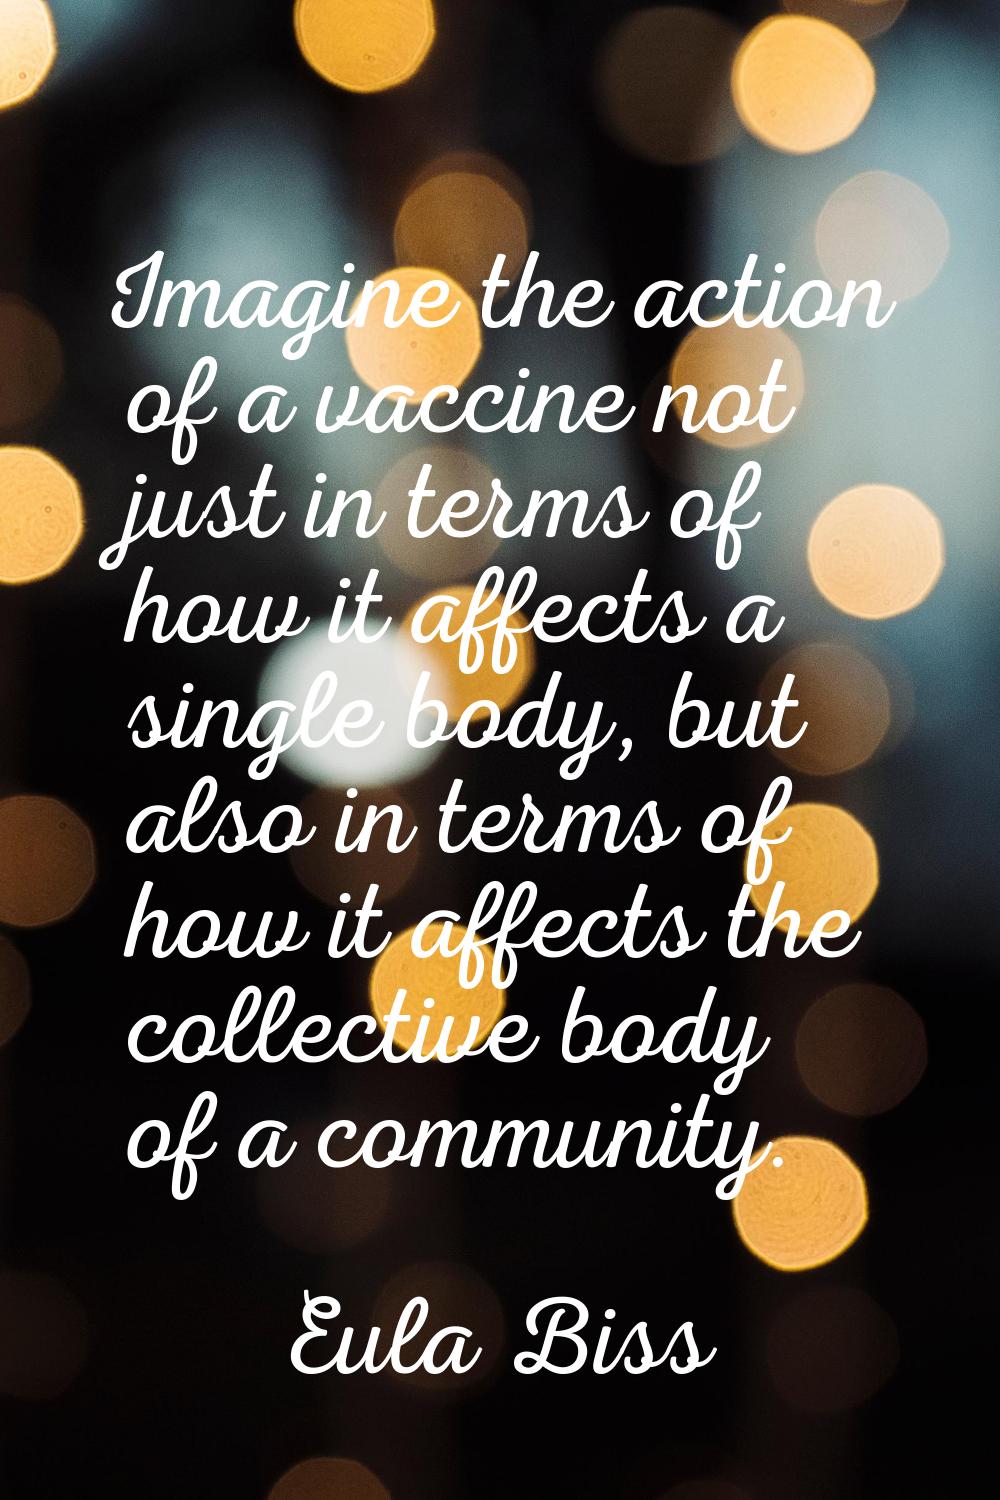 Imagine the action of a vaccine not just in terms of how it affects a single body, but also in term